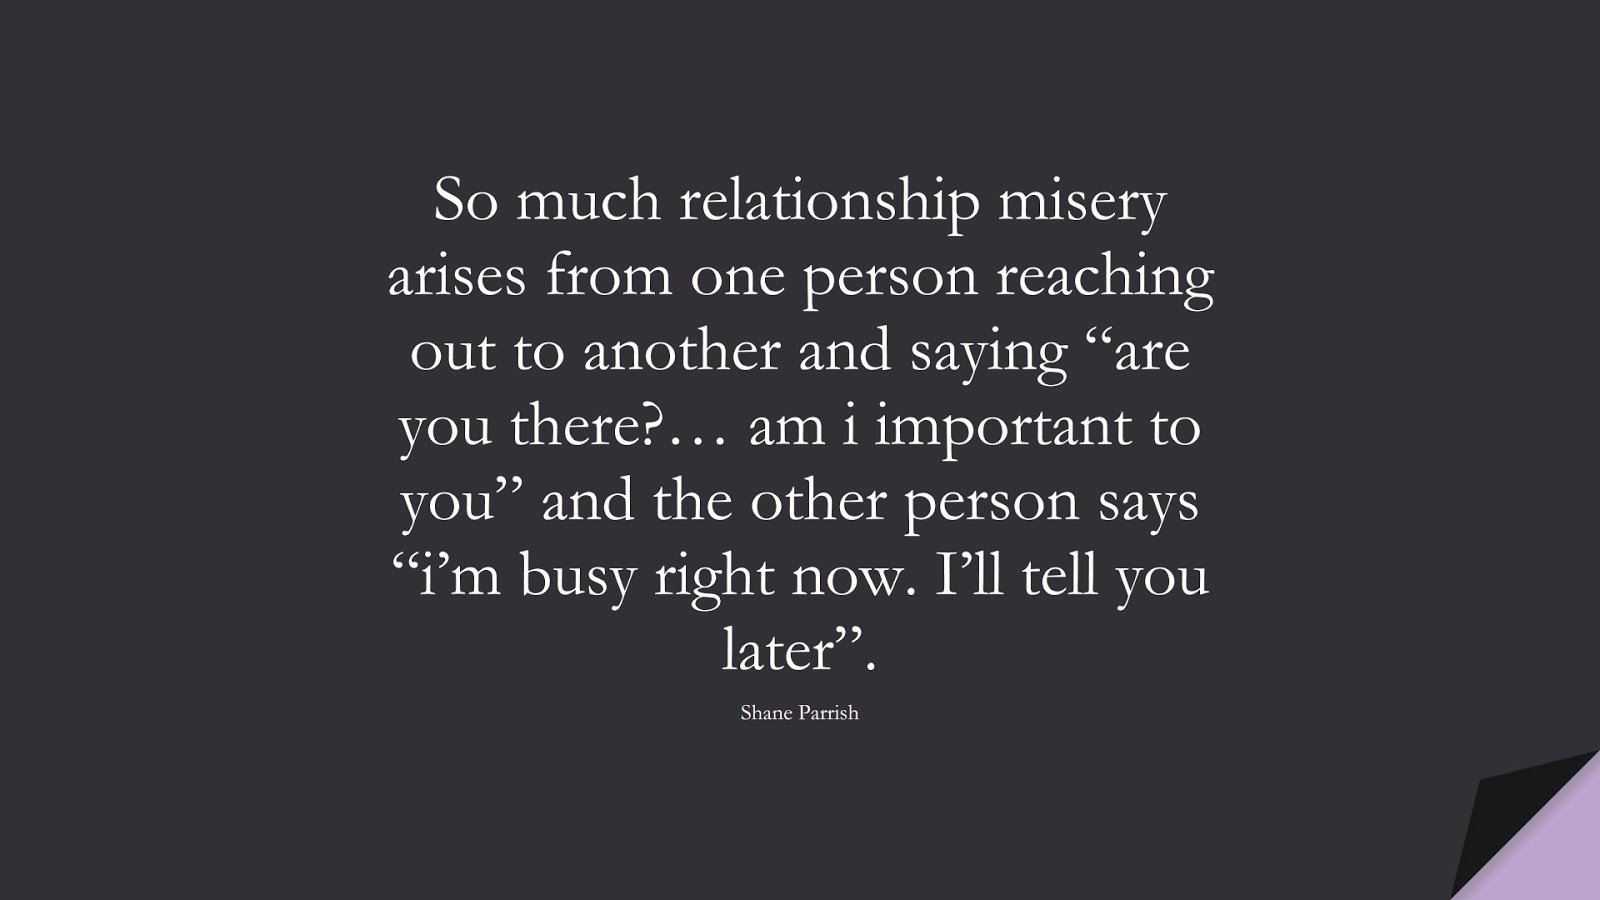 So much relationship misery arises from one person reaching out to another and saying “are you there?… am i important to you” and the other person says “i’m busy right now. I’ll tell you later”. (Shane Parrish);  #RelationshipQuotes